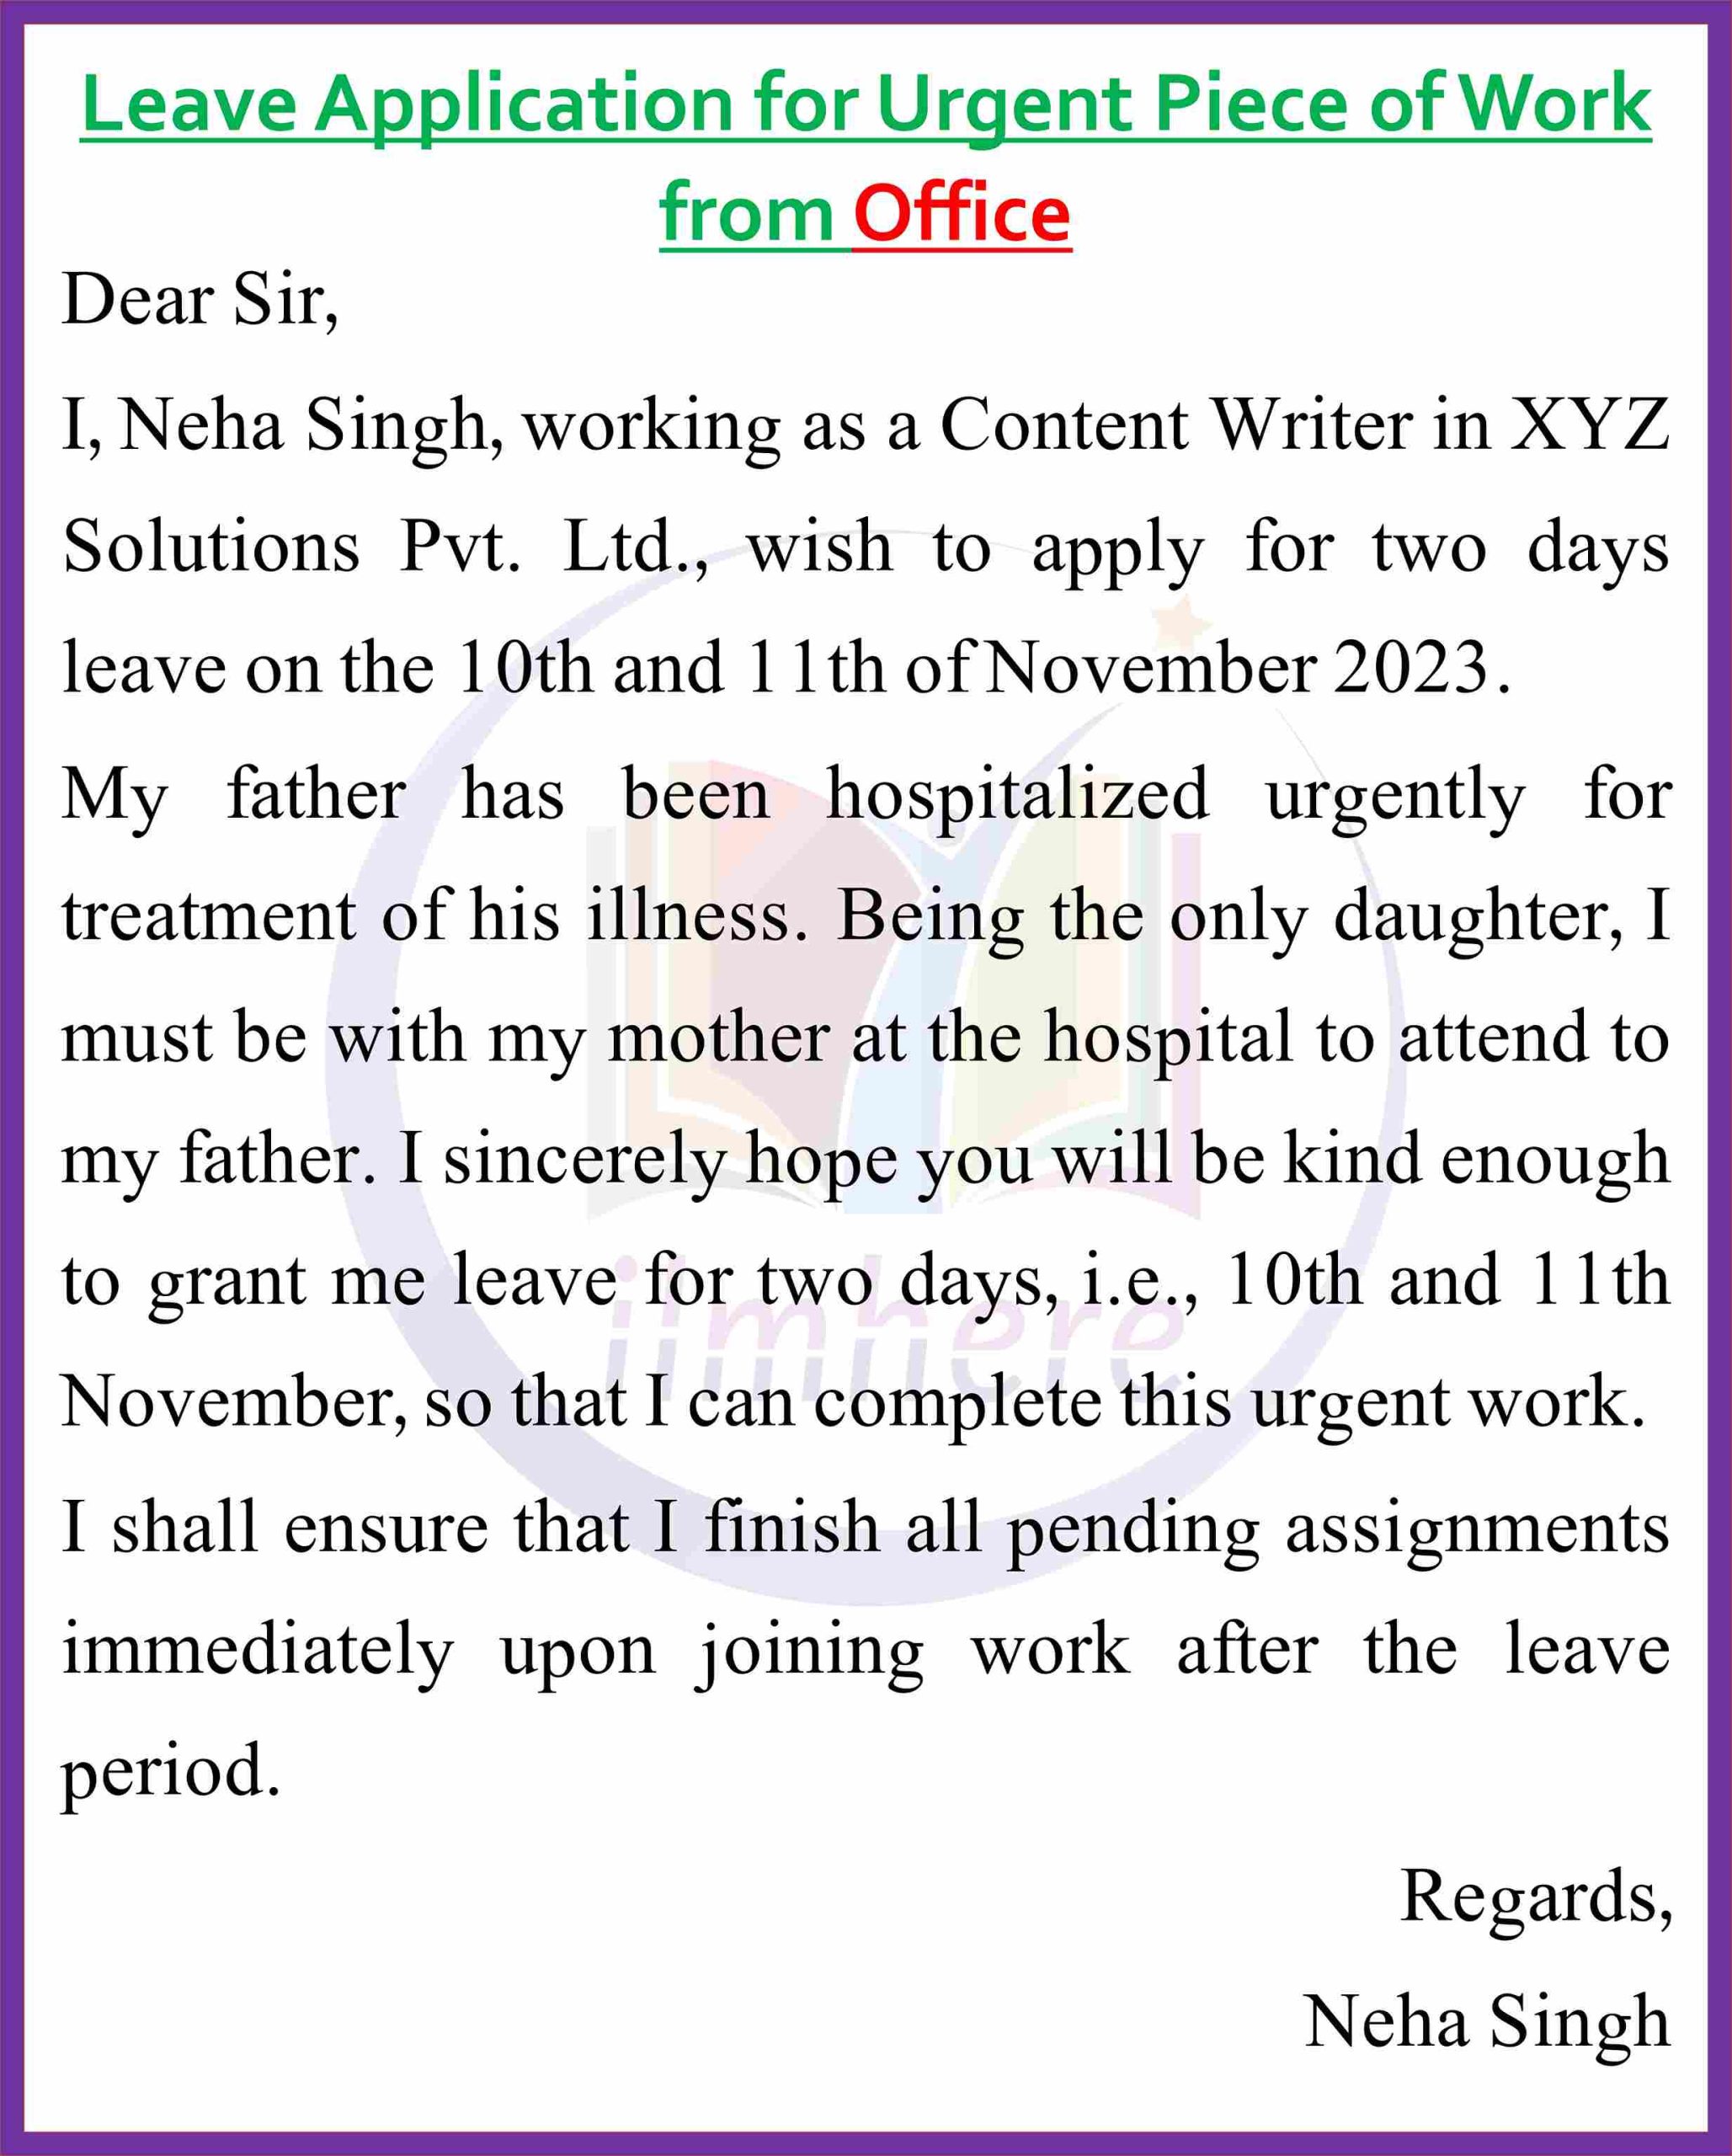 Leave Application for Urgent Piece of Work from Office